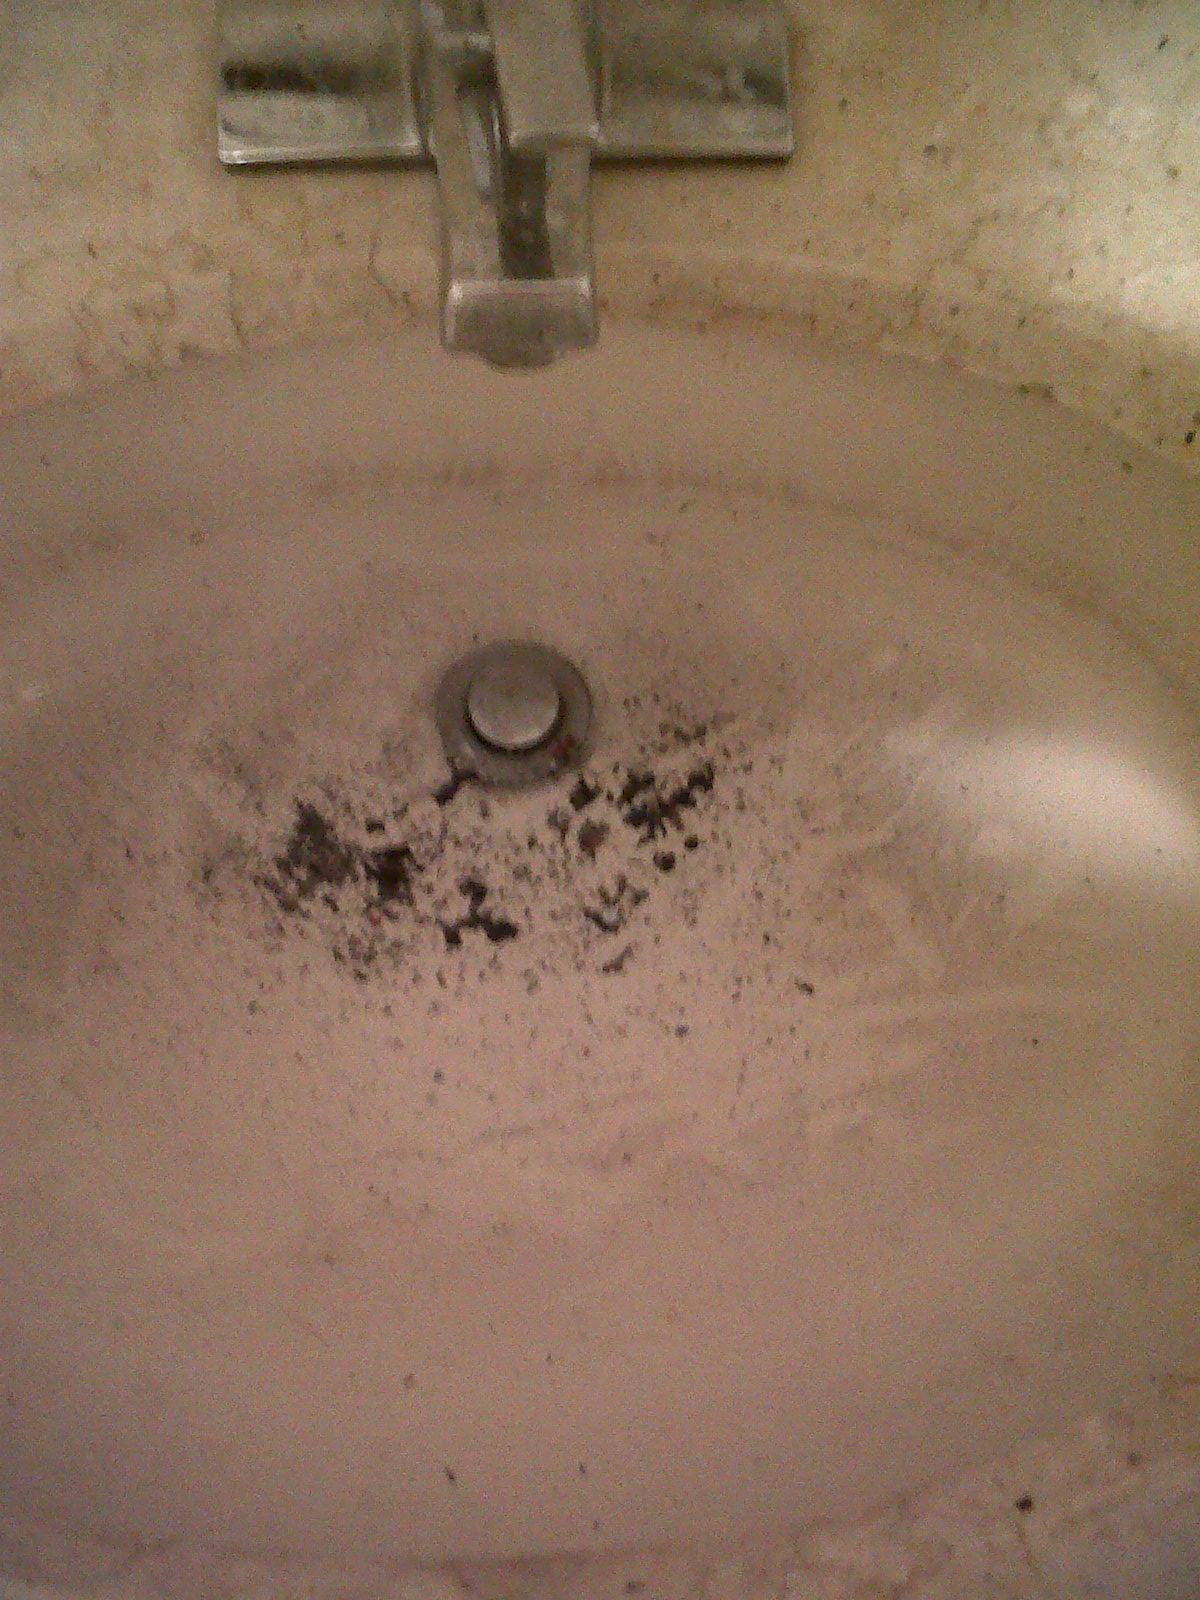 Sink. After 2 hrs of cleaning which I have been doing almost everynight